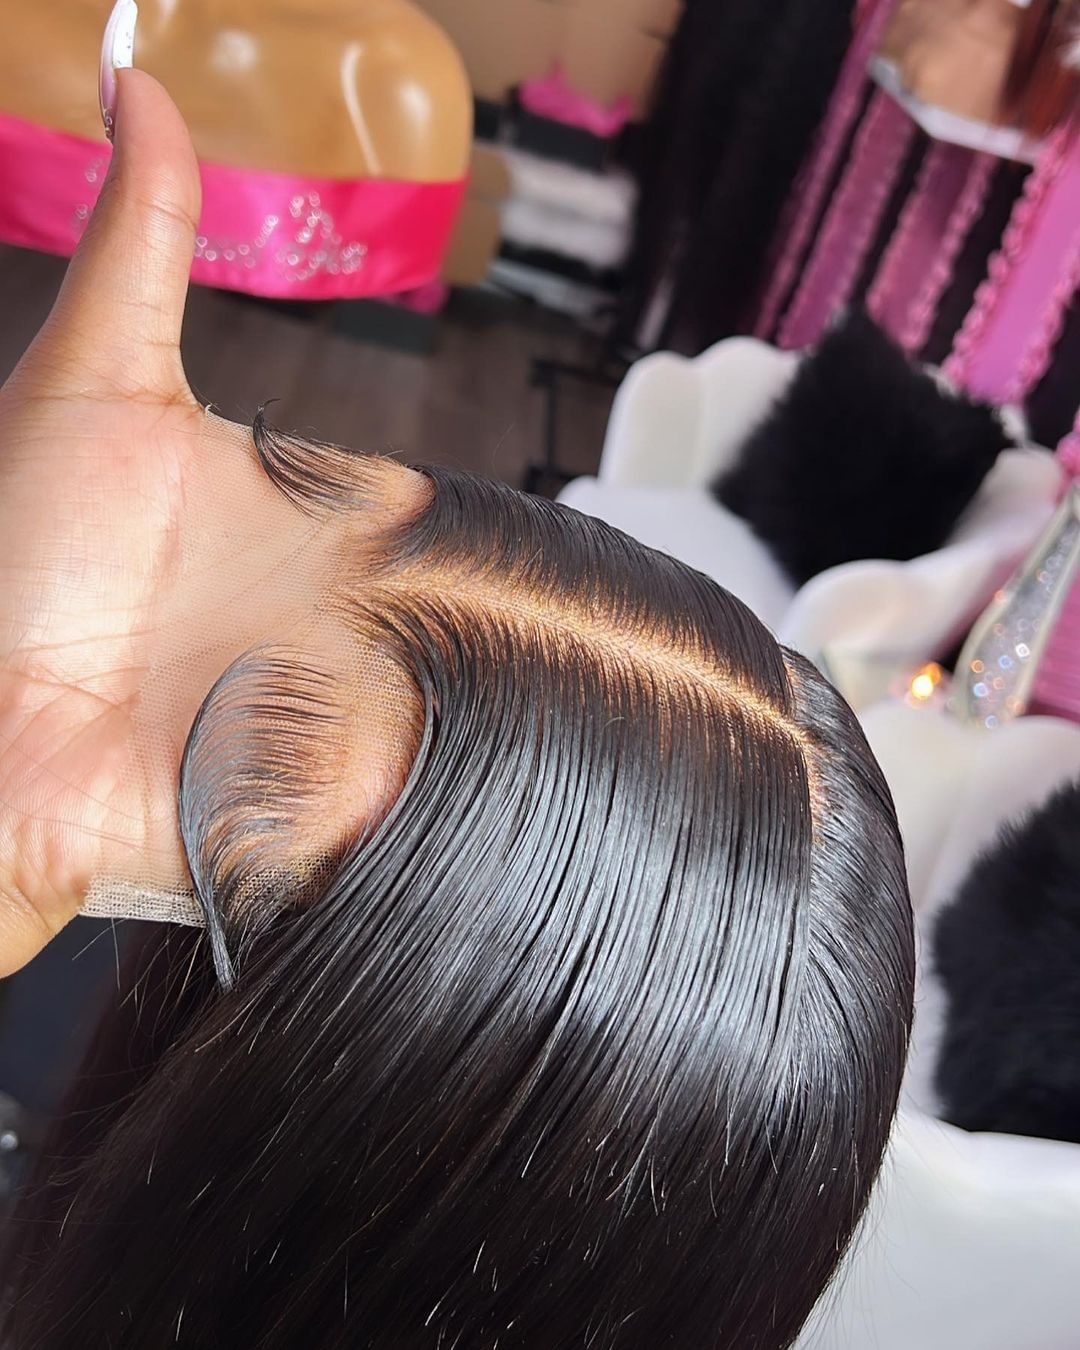 How to stop the tension from lacefront wigs